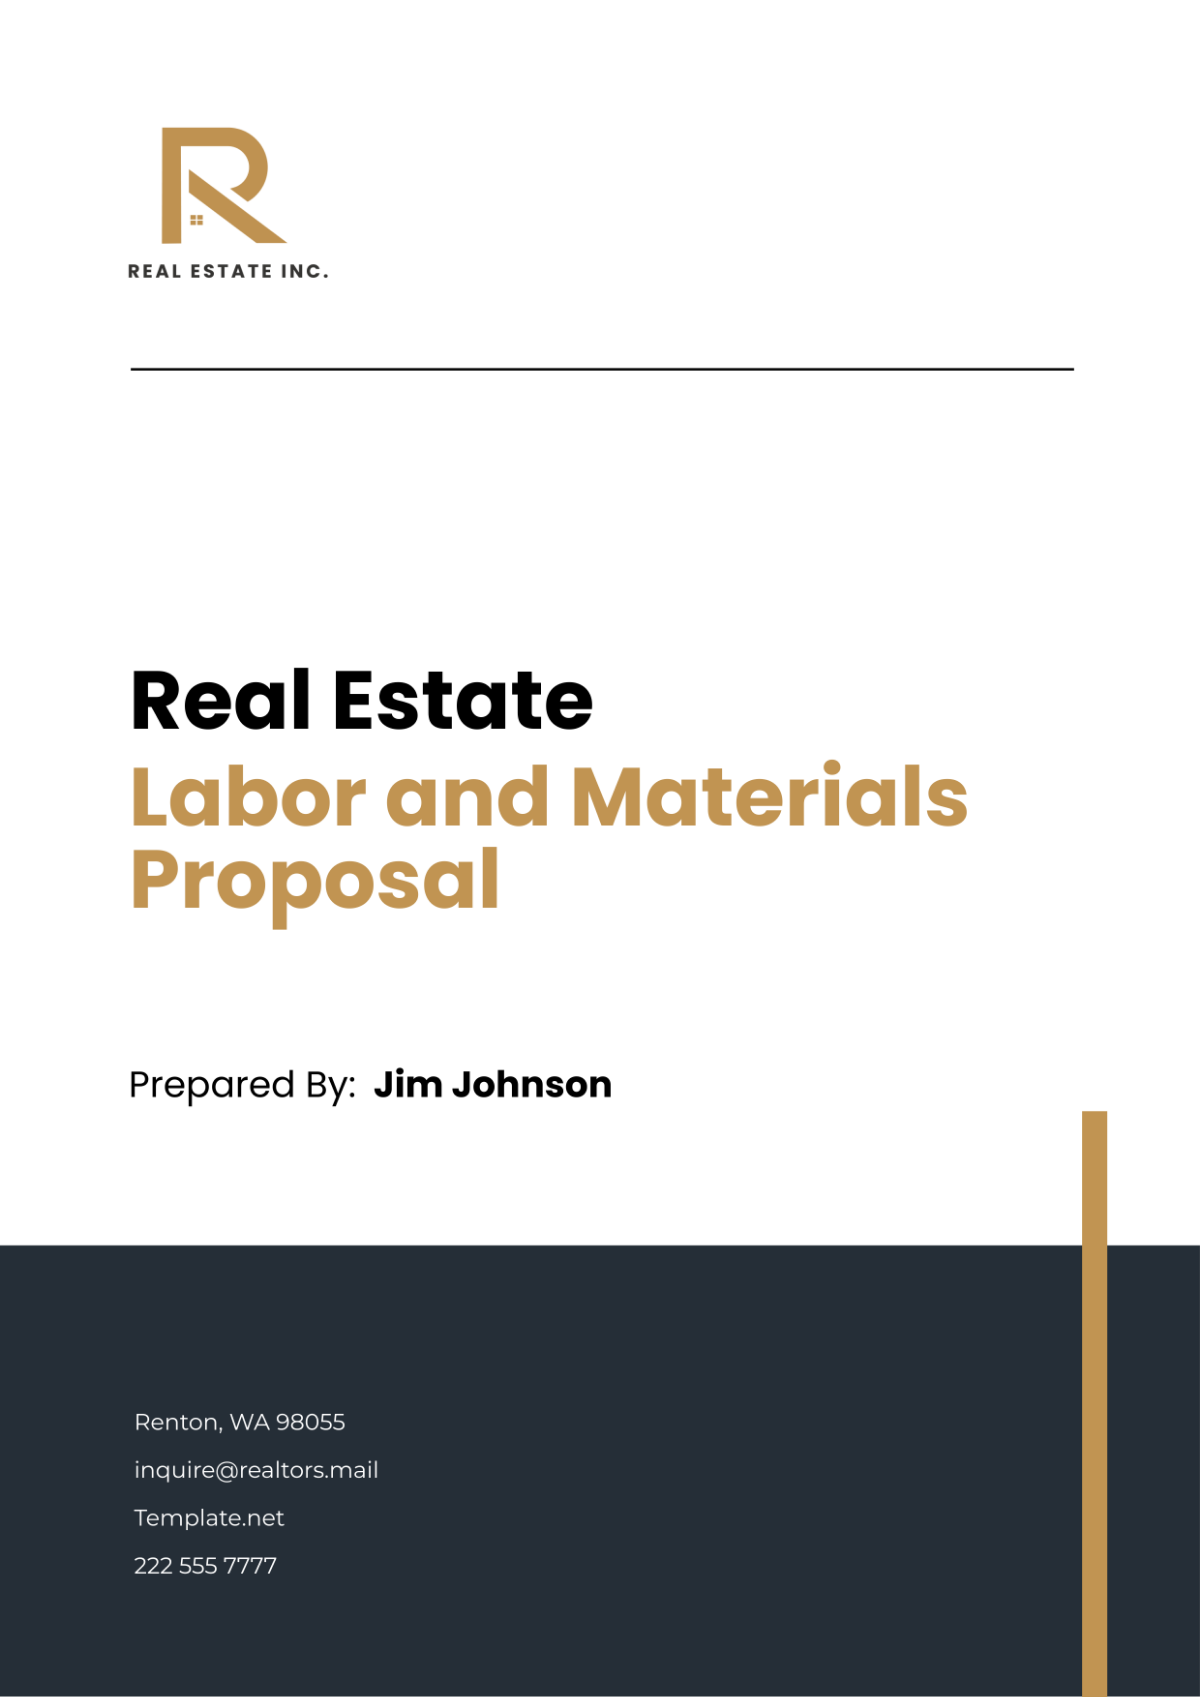 Free Real Estate Labor and Materials Proposal Template